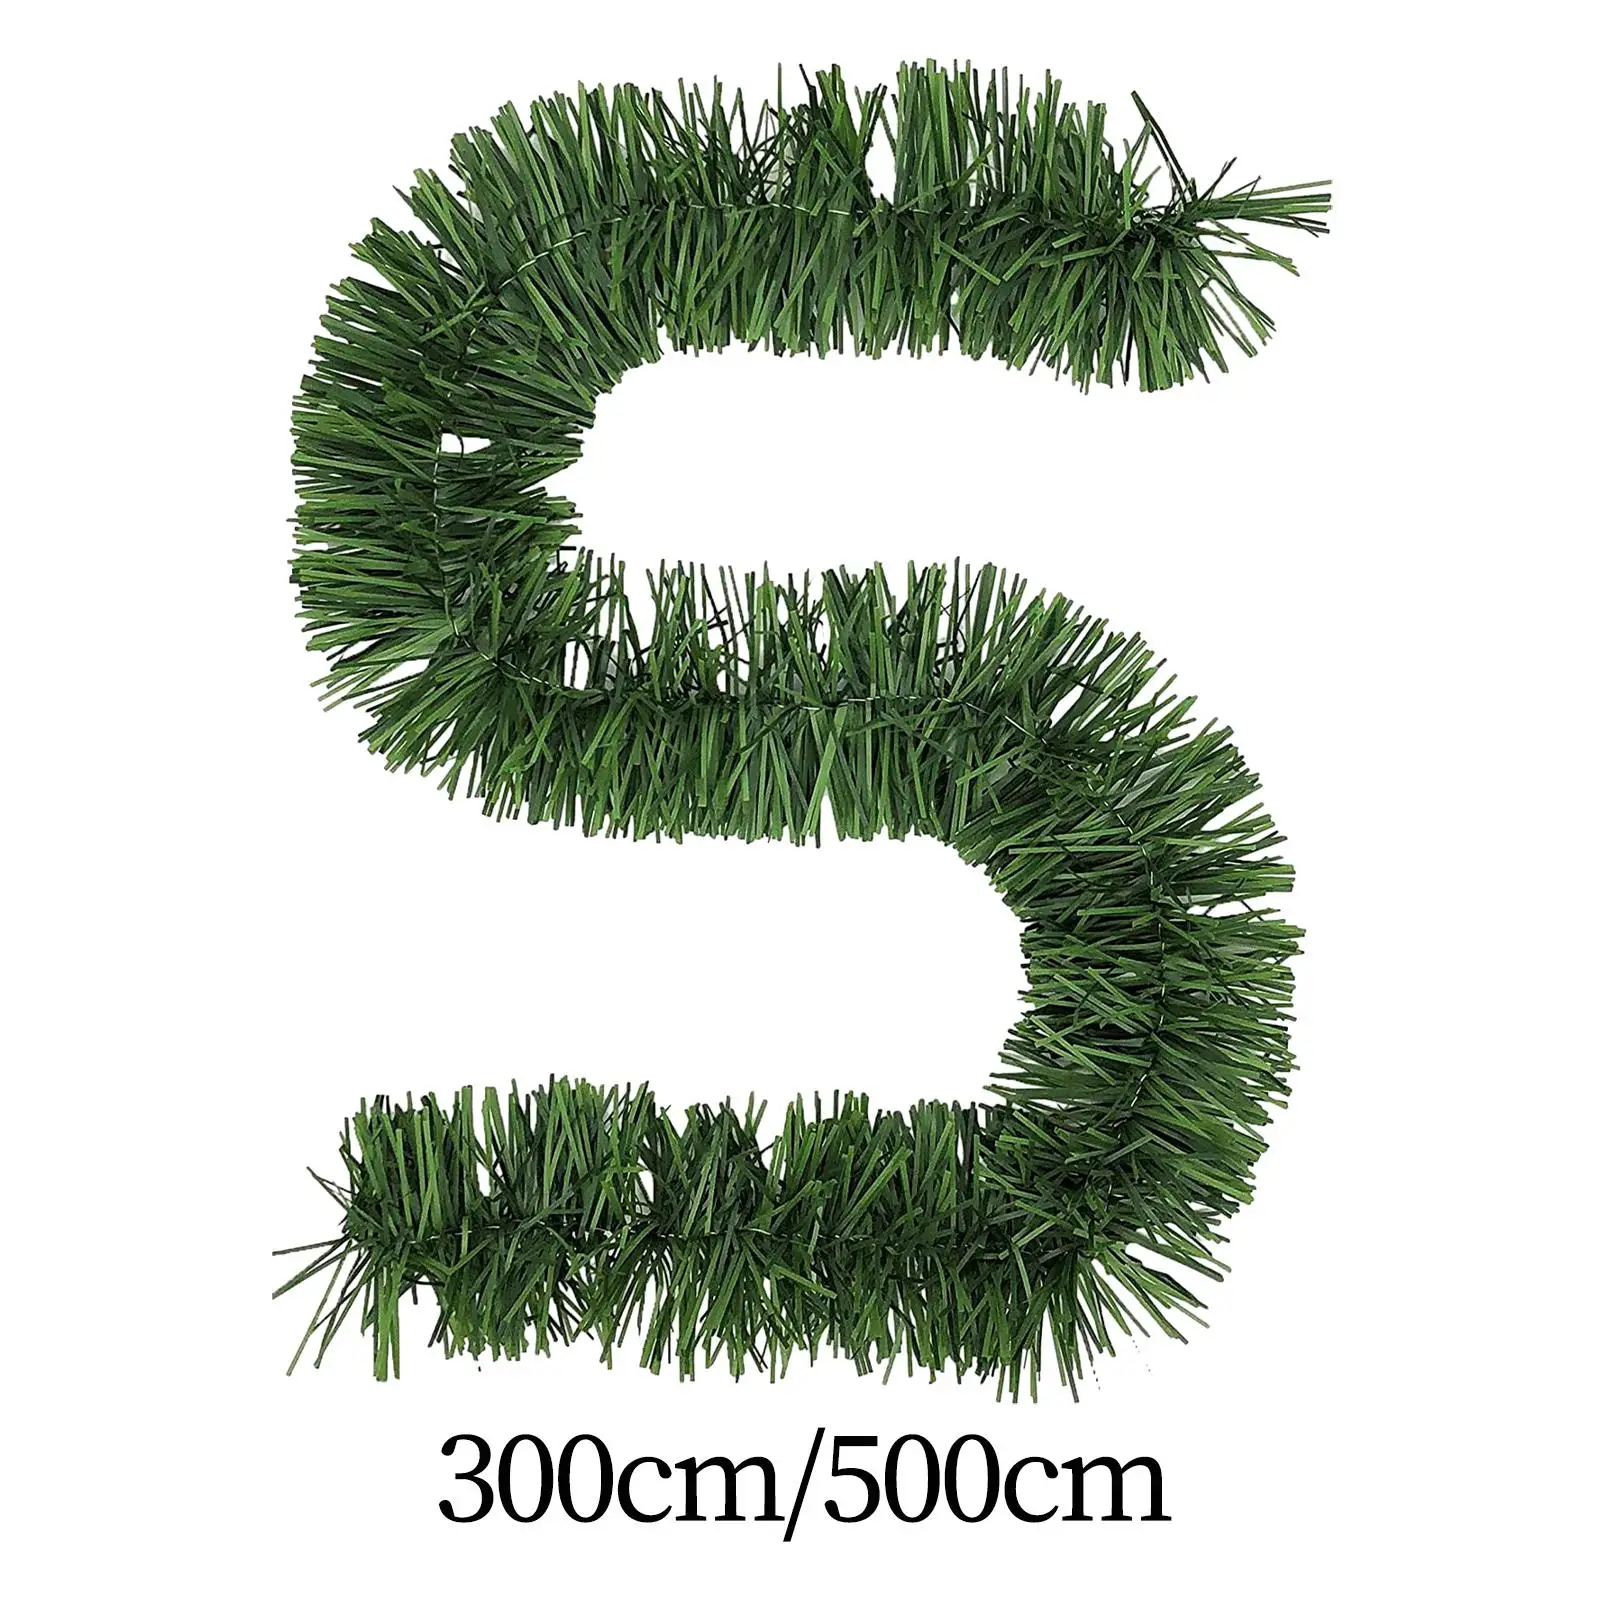 Artificial Christmas Garland Christmas Decorations Hanging Holiday Garland for Railing Table Indoor Outdoor Winter Outside